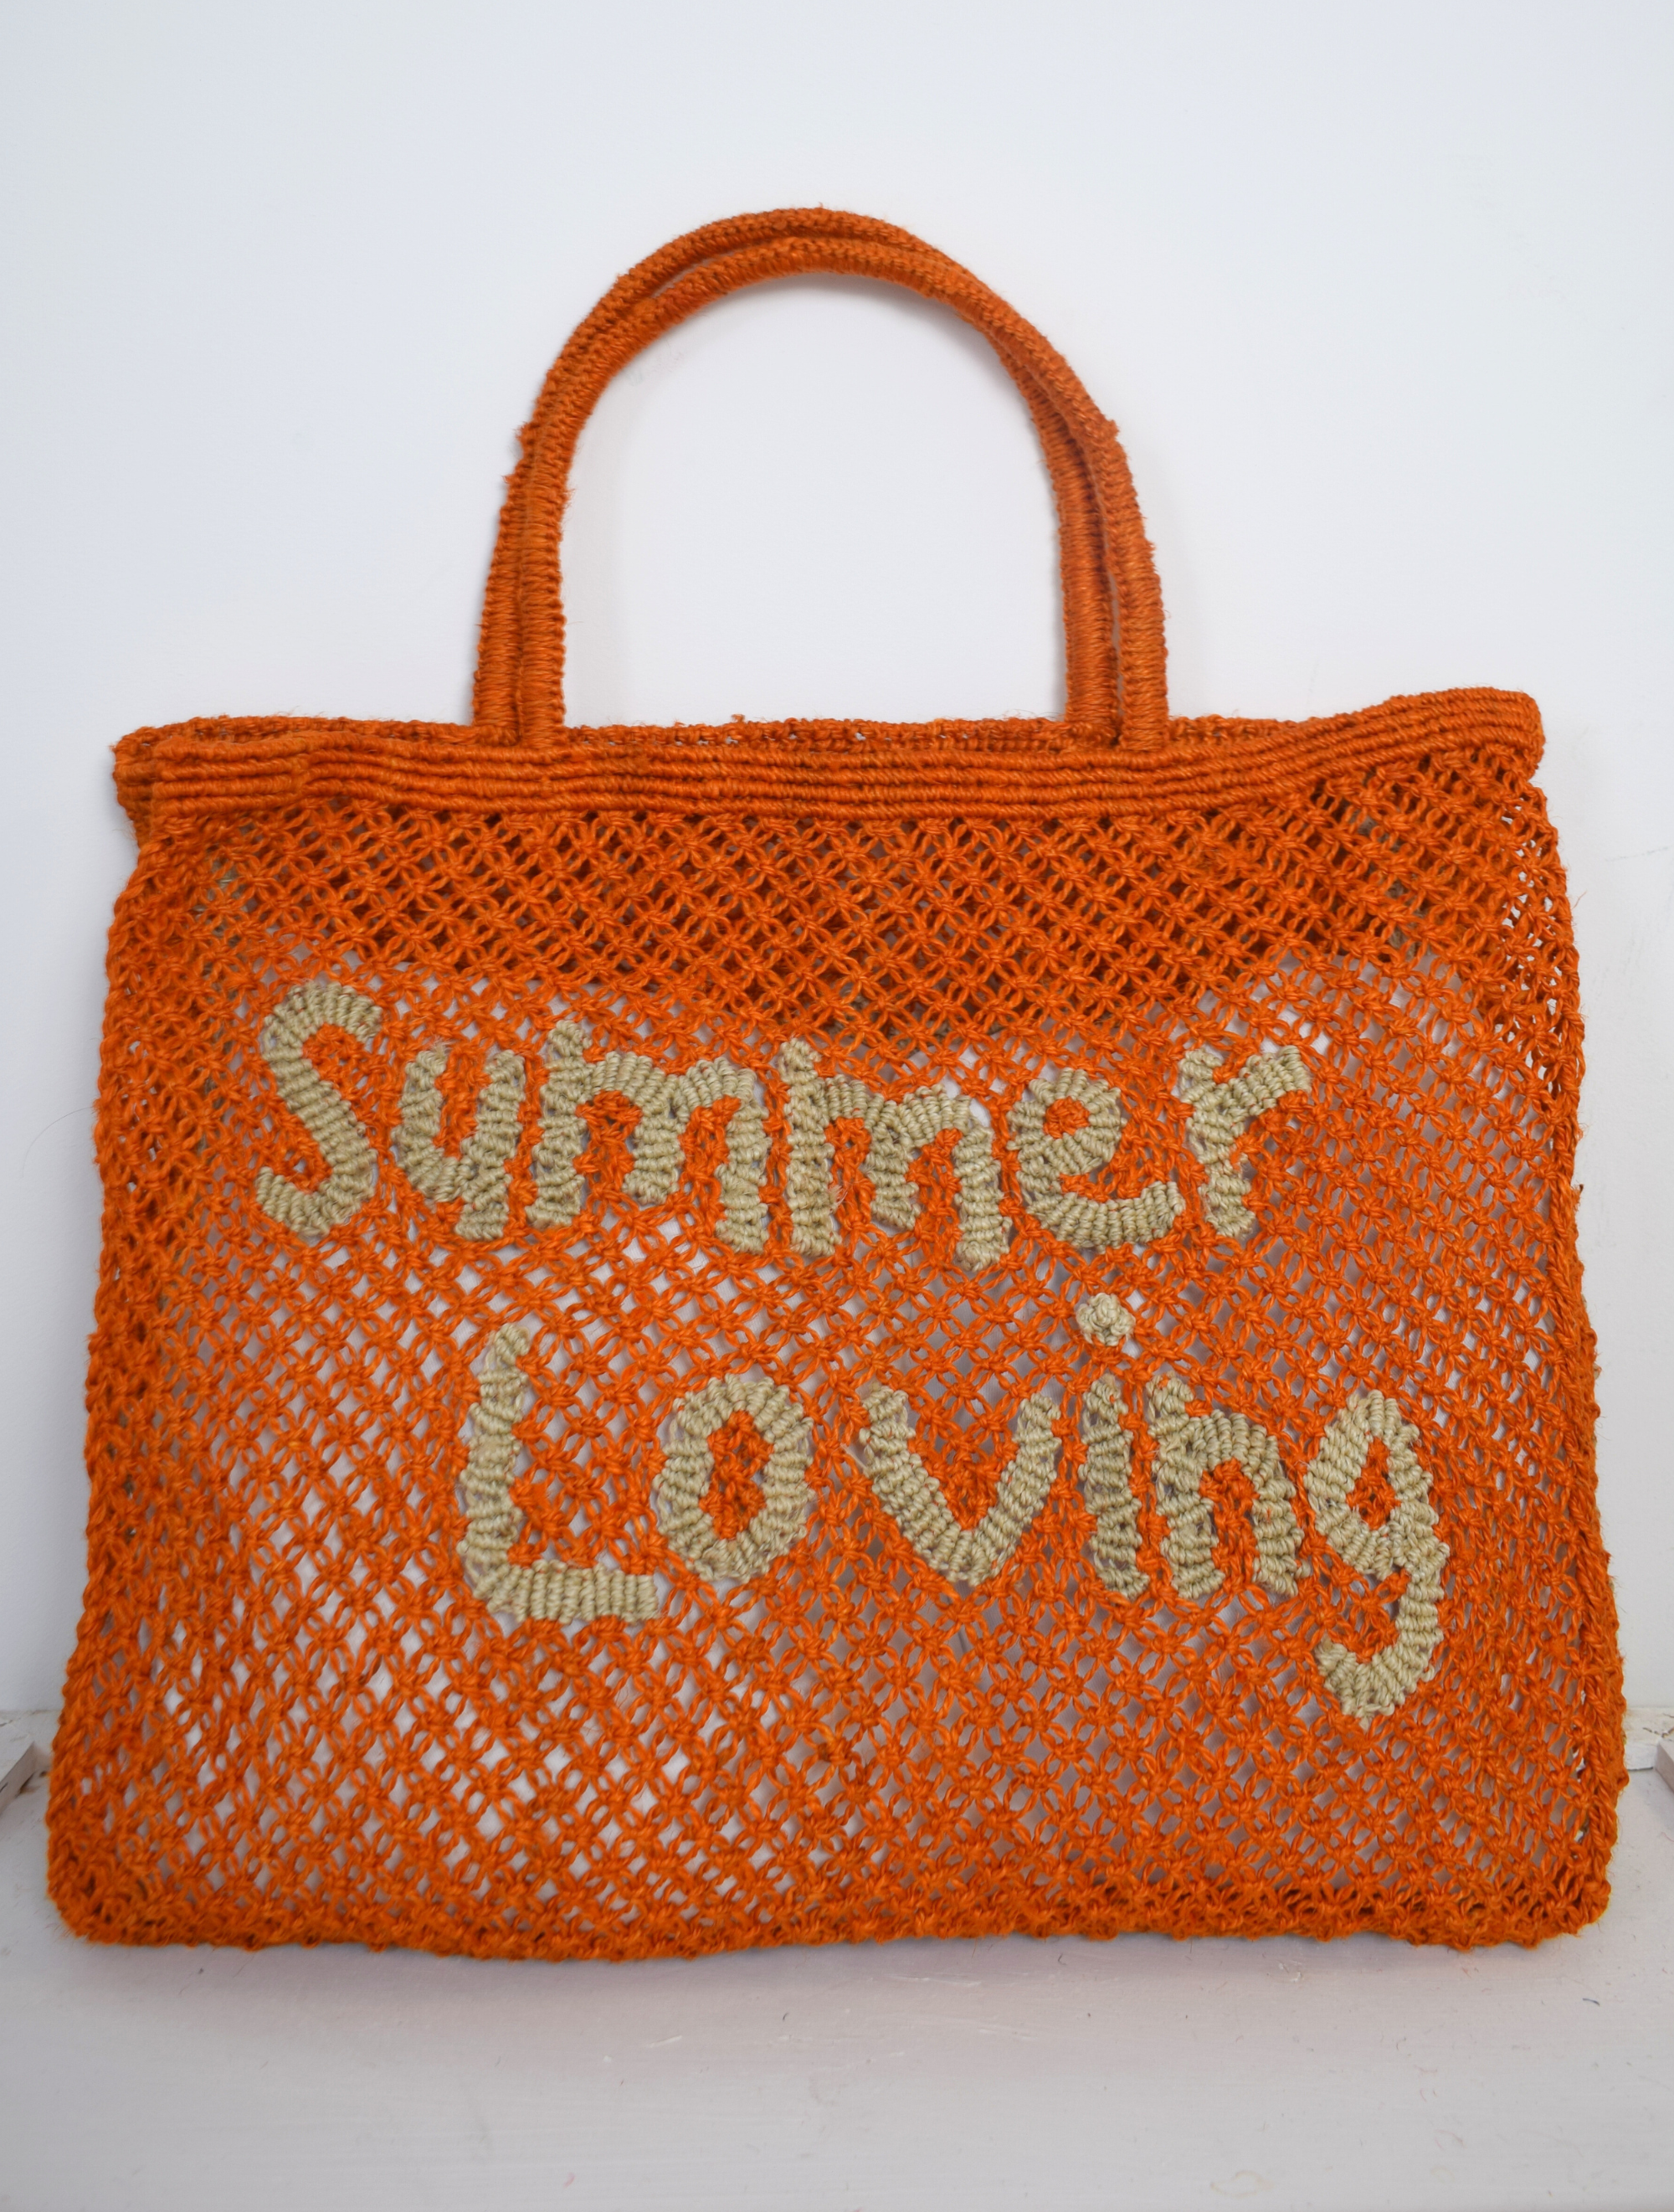 Orange woven bag with neutral writing